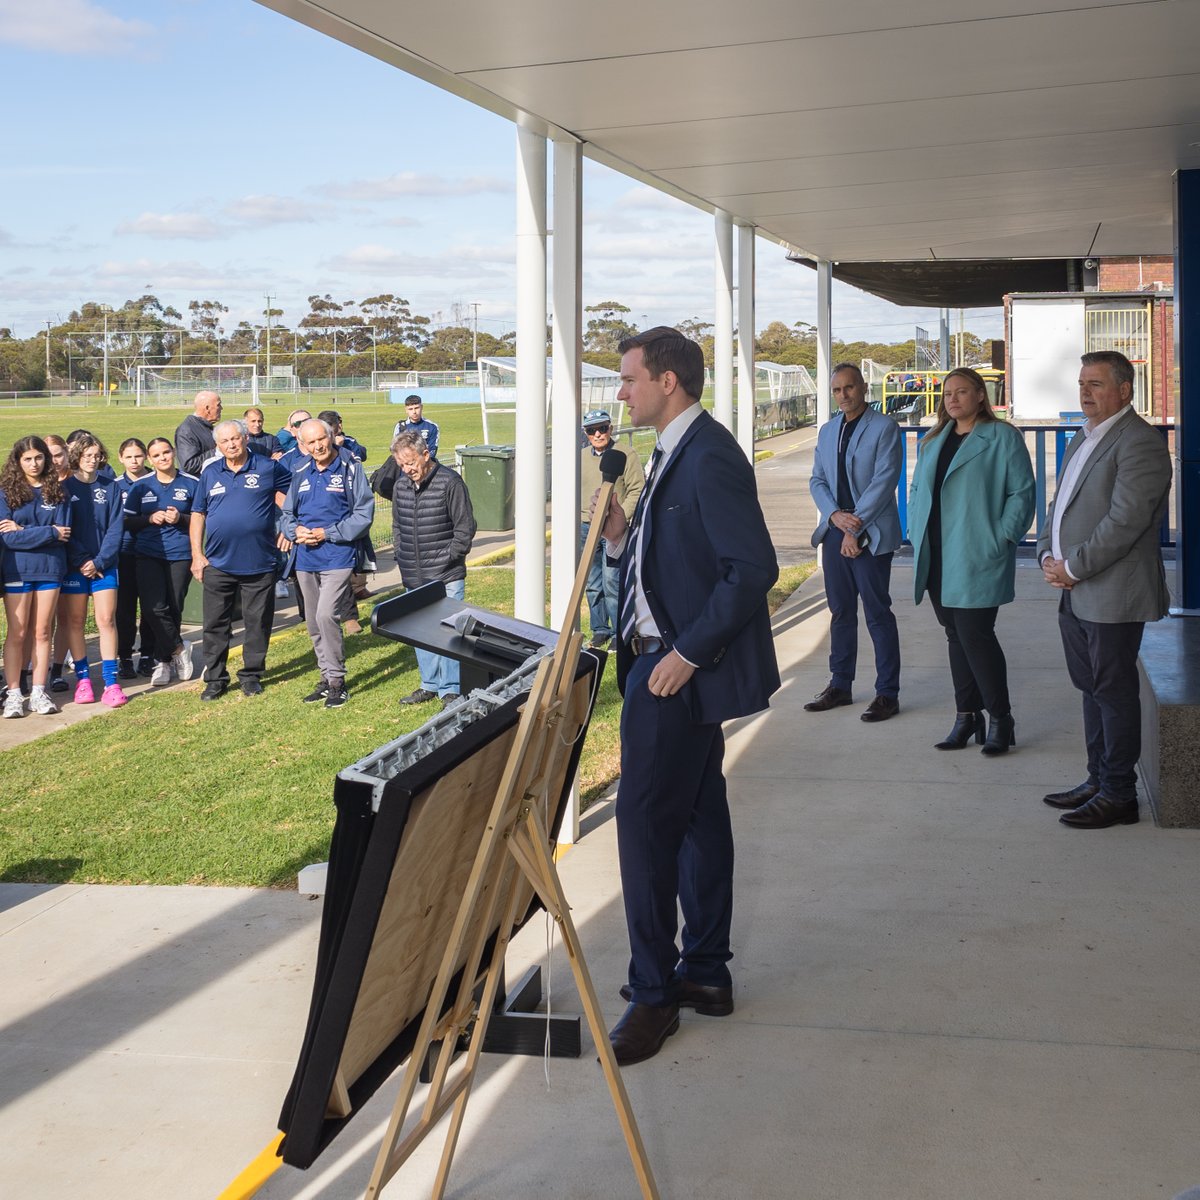 We officially opened new change facilities at the Bell Park Sports Club in Batesford today ⚽! The new female friendly facilities were officially opened by councillors, Member for Lara Ella George MP and club president Rose Pirrottina.